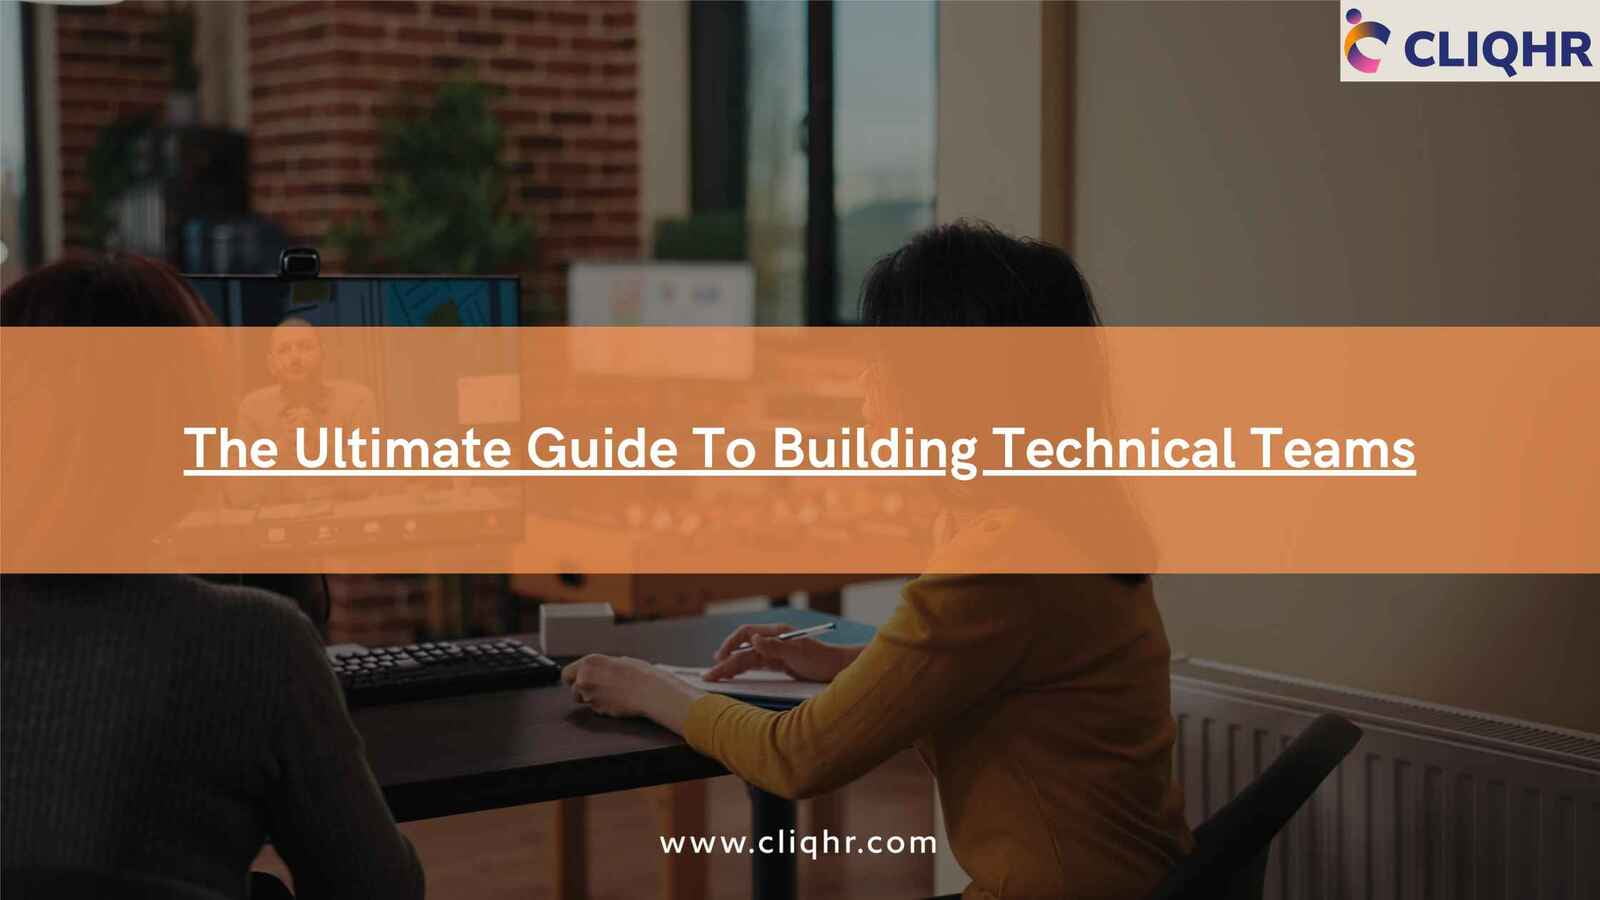 The ultimate guide to building technical teams